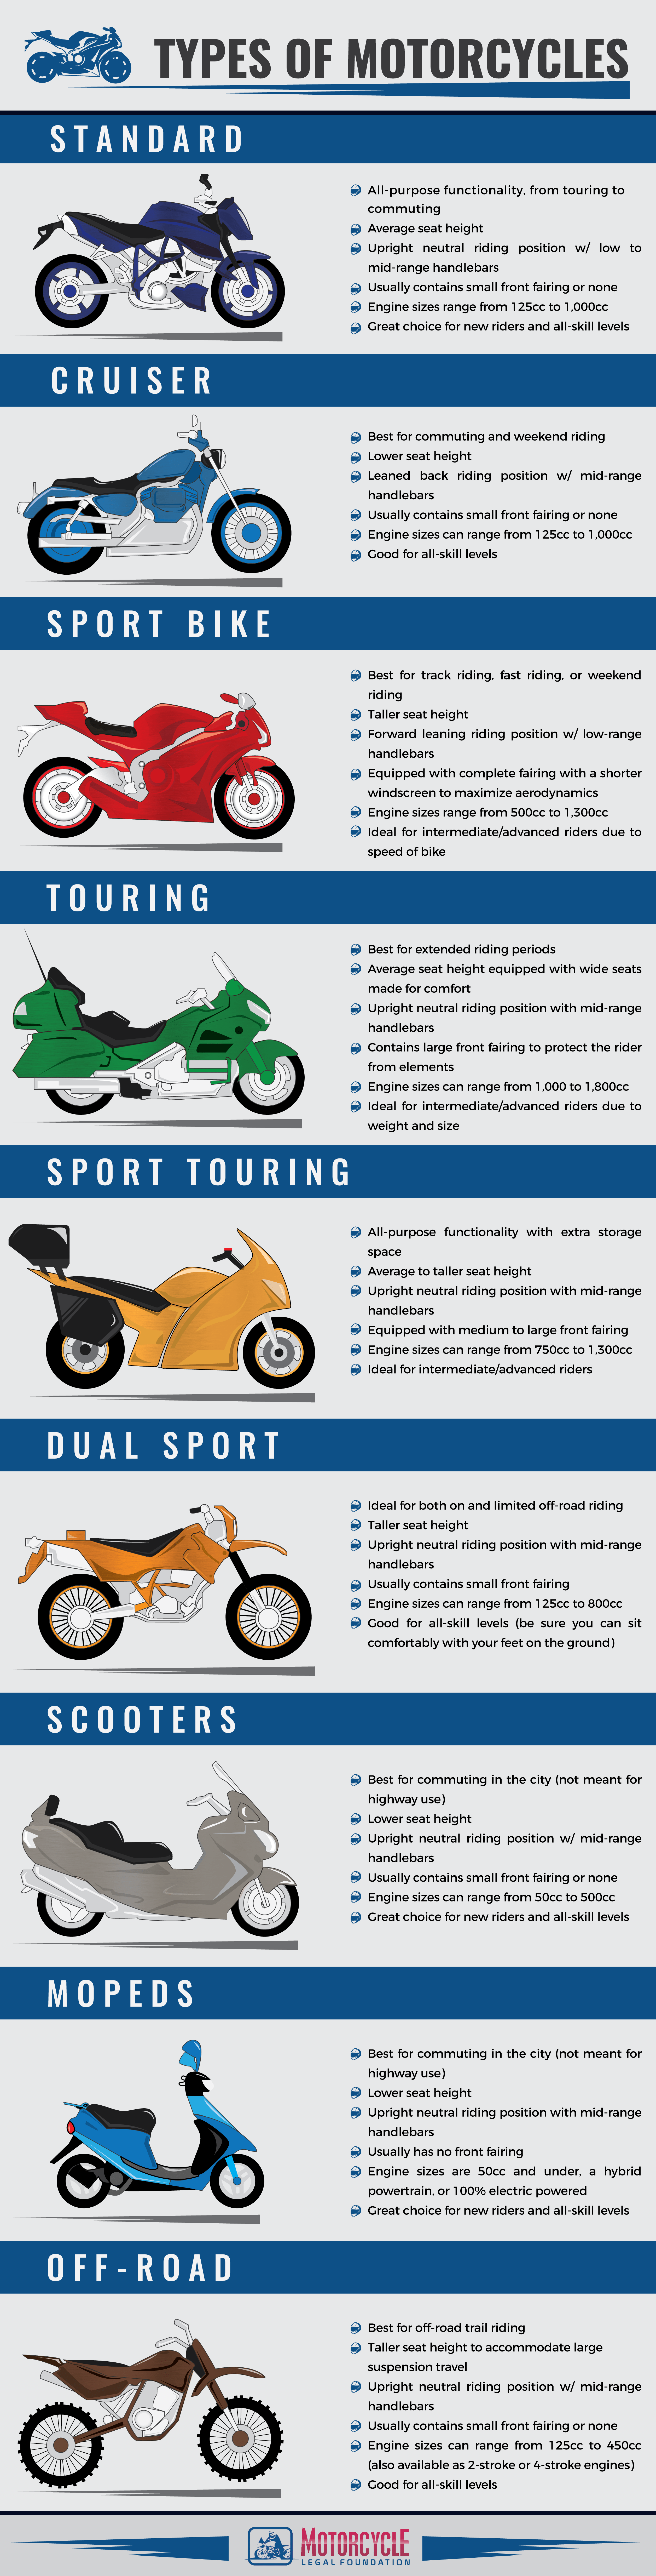 Types of Motorcycles Infographic